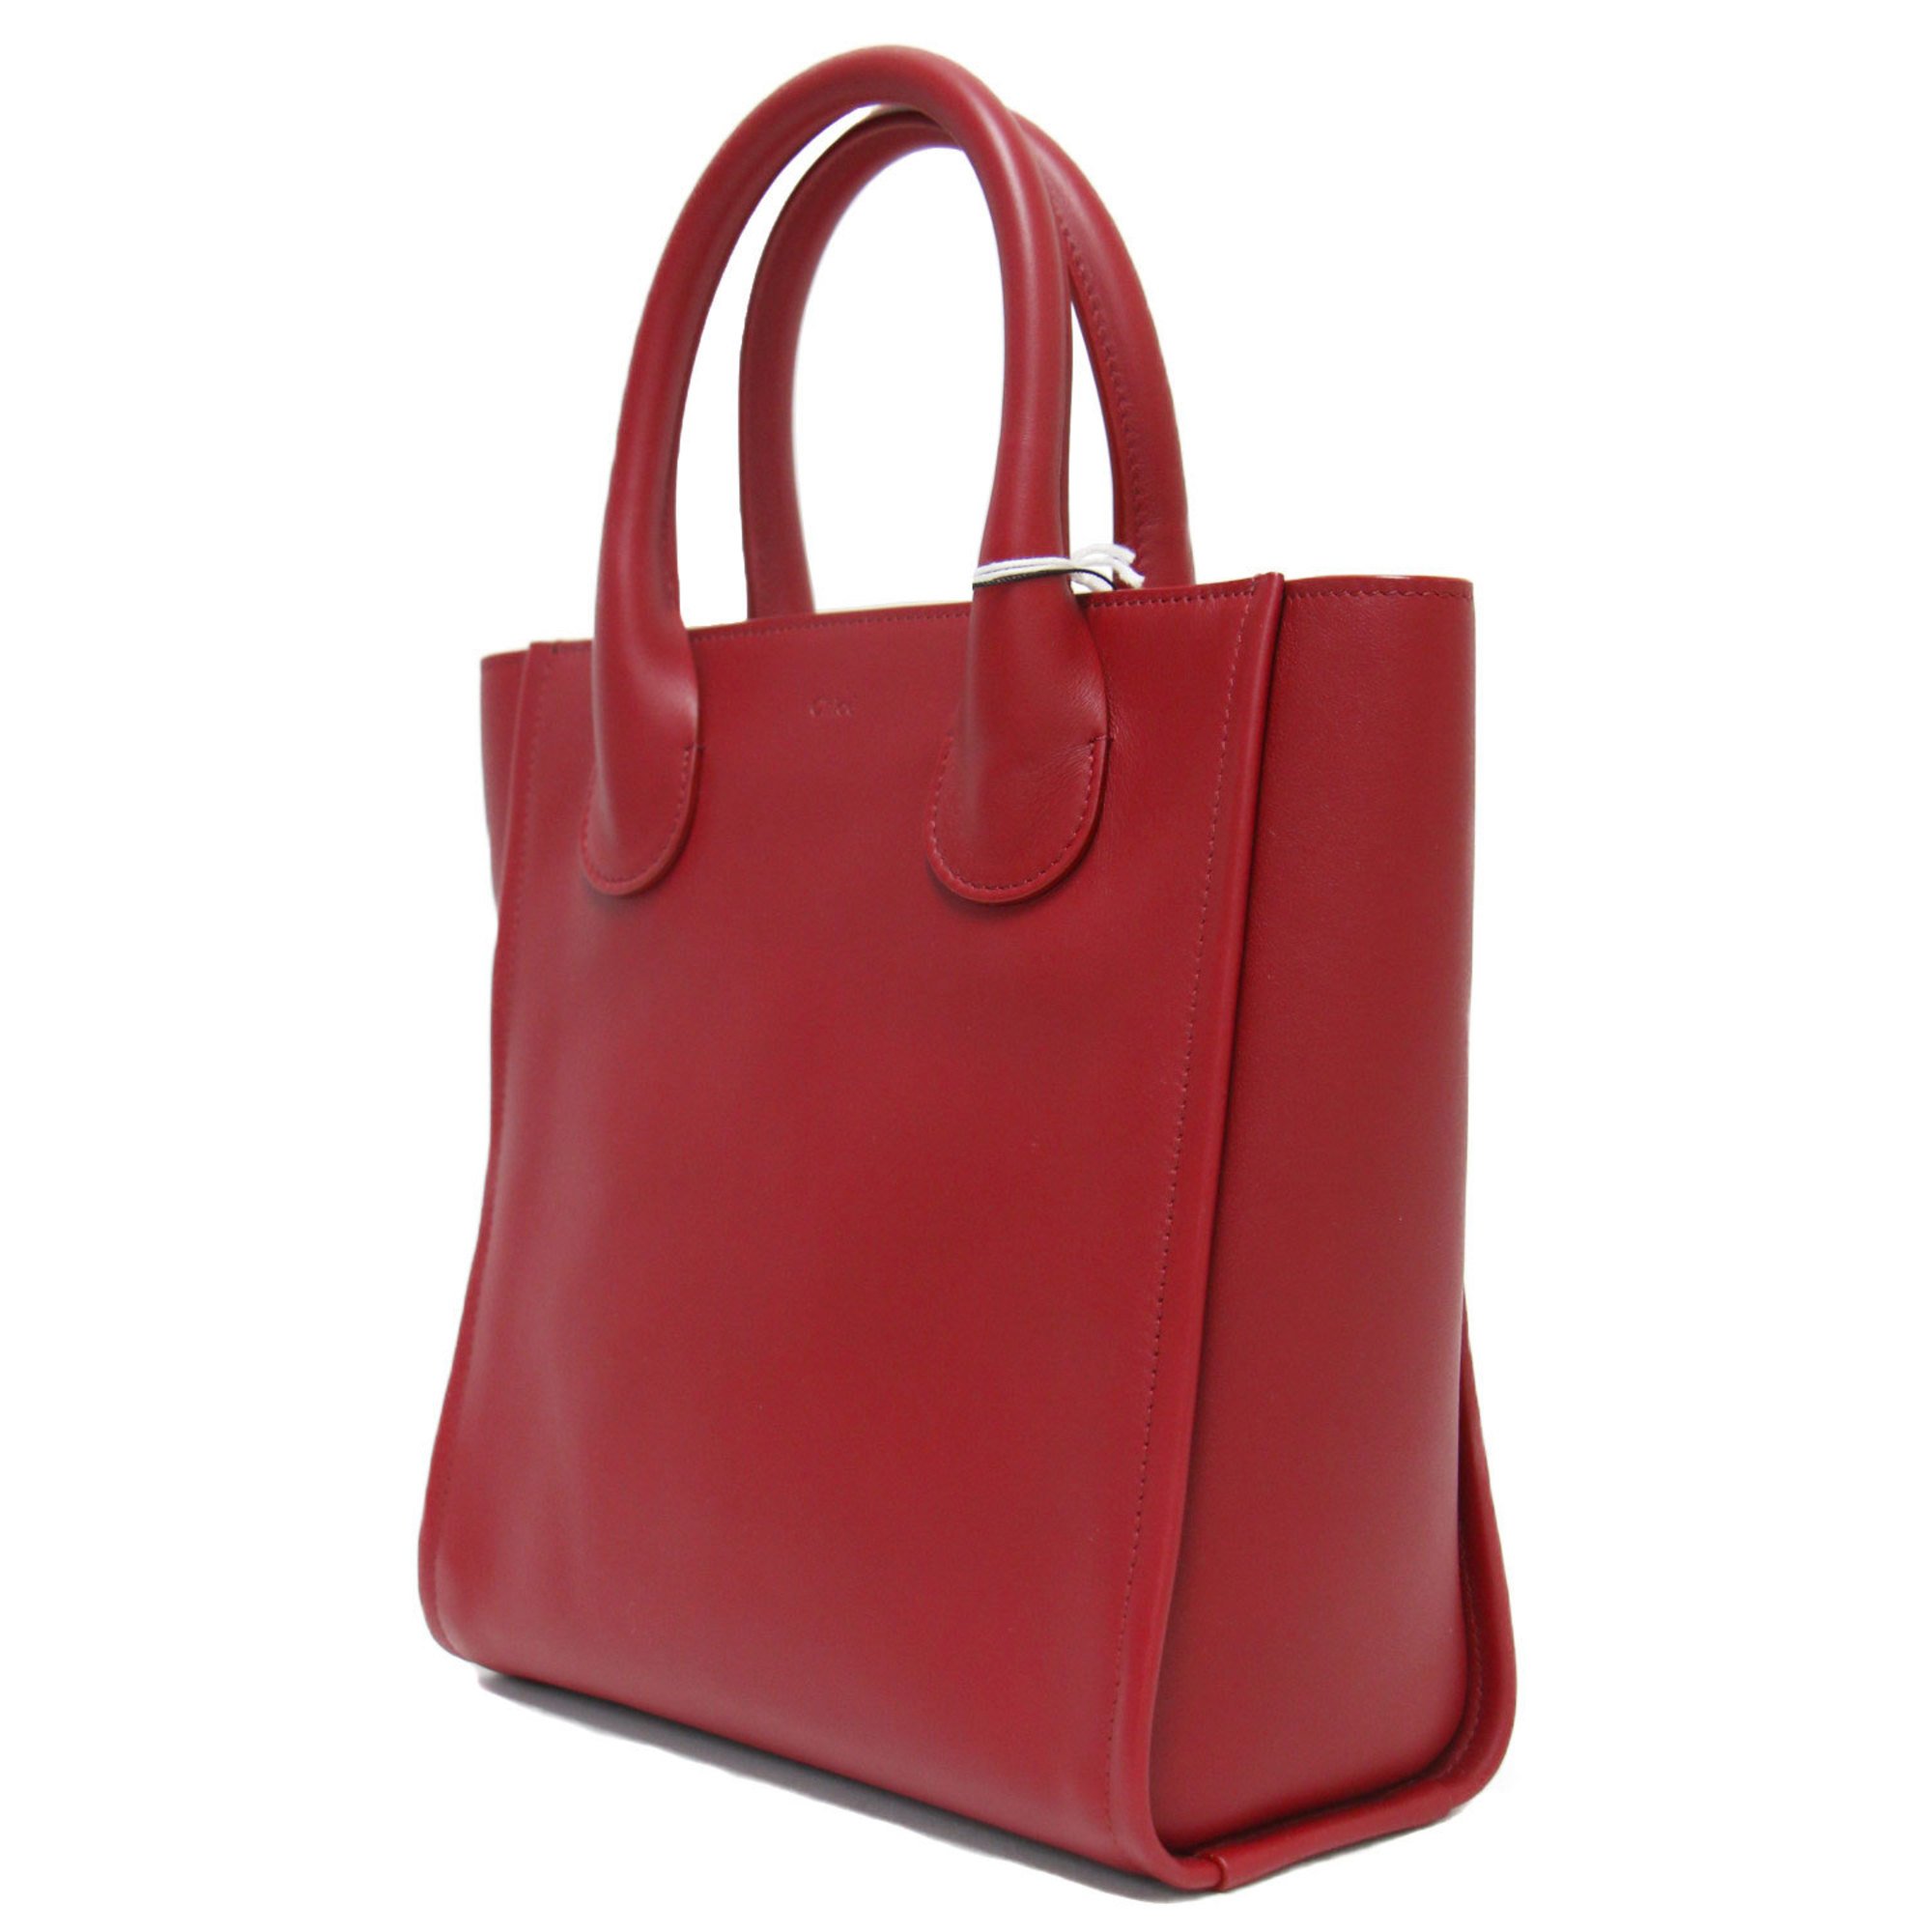 Chloé Chloe Bag Tote Hand Shoulder JOYCE SMALL TOTE Leather Cowhide Red Luxury